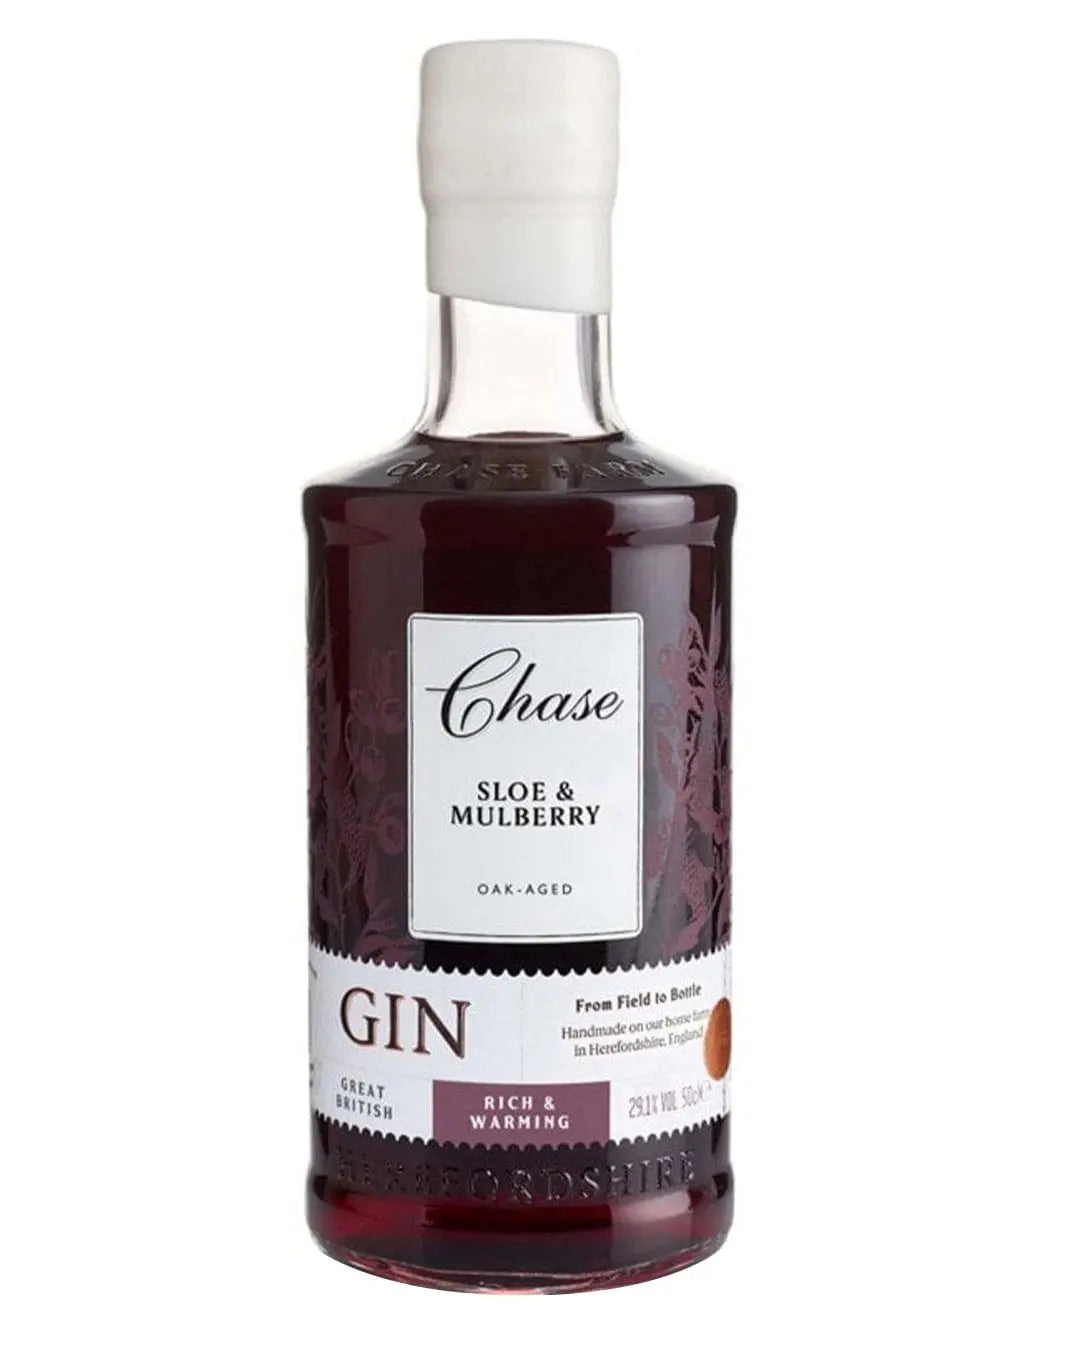 Chase Sloe & Mulberry Gin, 50 cl Gin